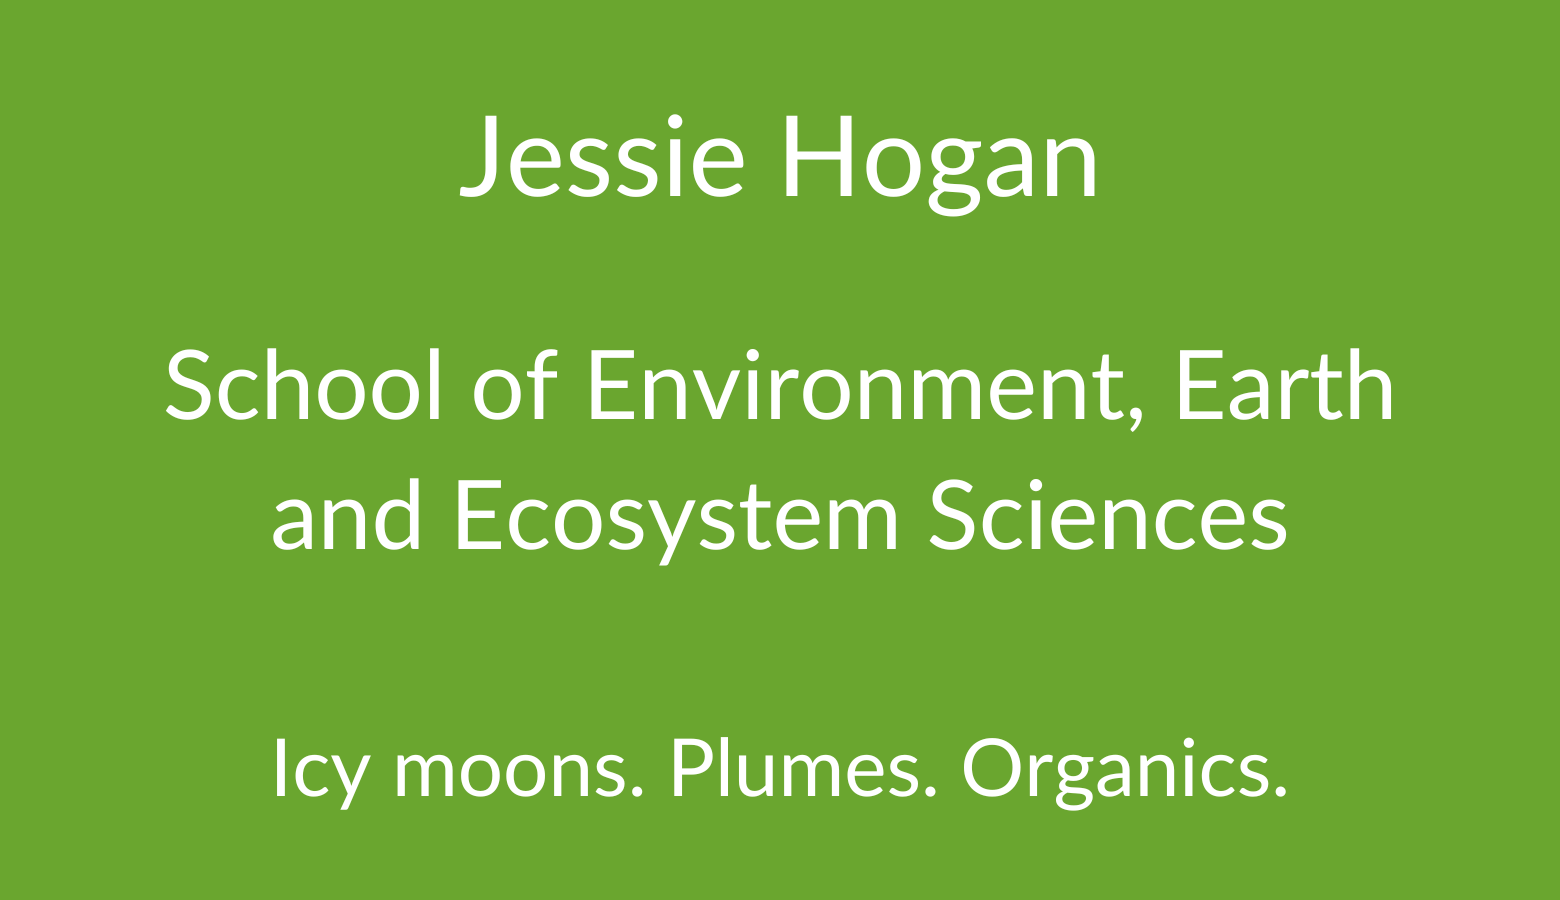 Jessie Hogan. School of Environment, Earth and Ecosystem Sciences. Icy moons. Plumes. Organics.